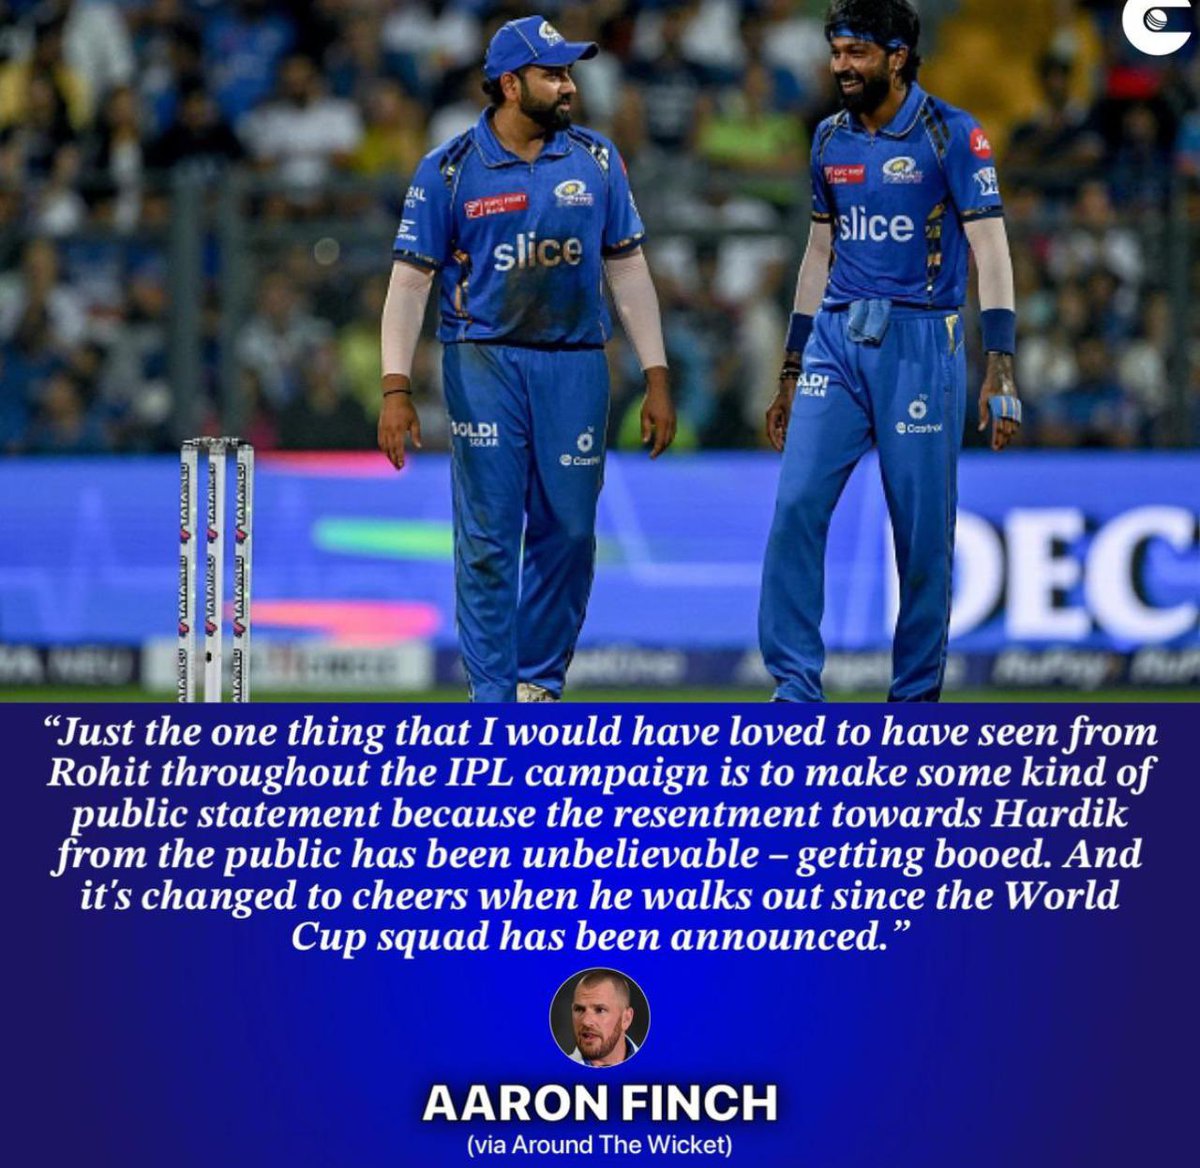 Aaron Finch is spot on, Rohit Sharma lost respect this year due to his insensitive & downright classless behaviour